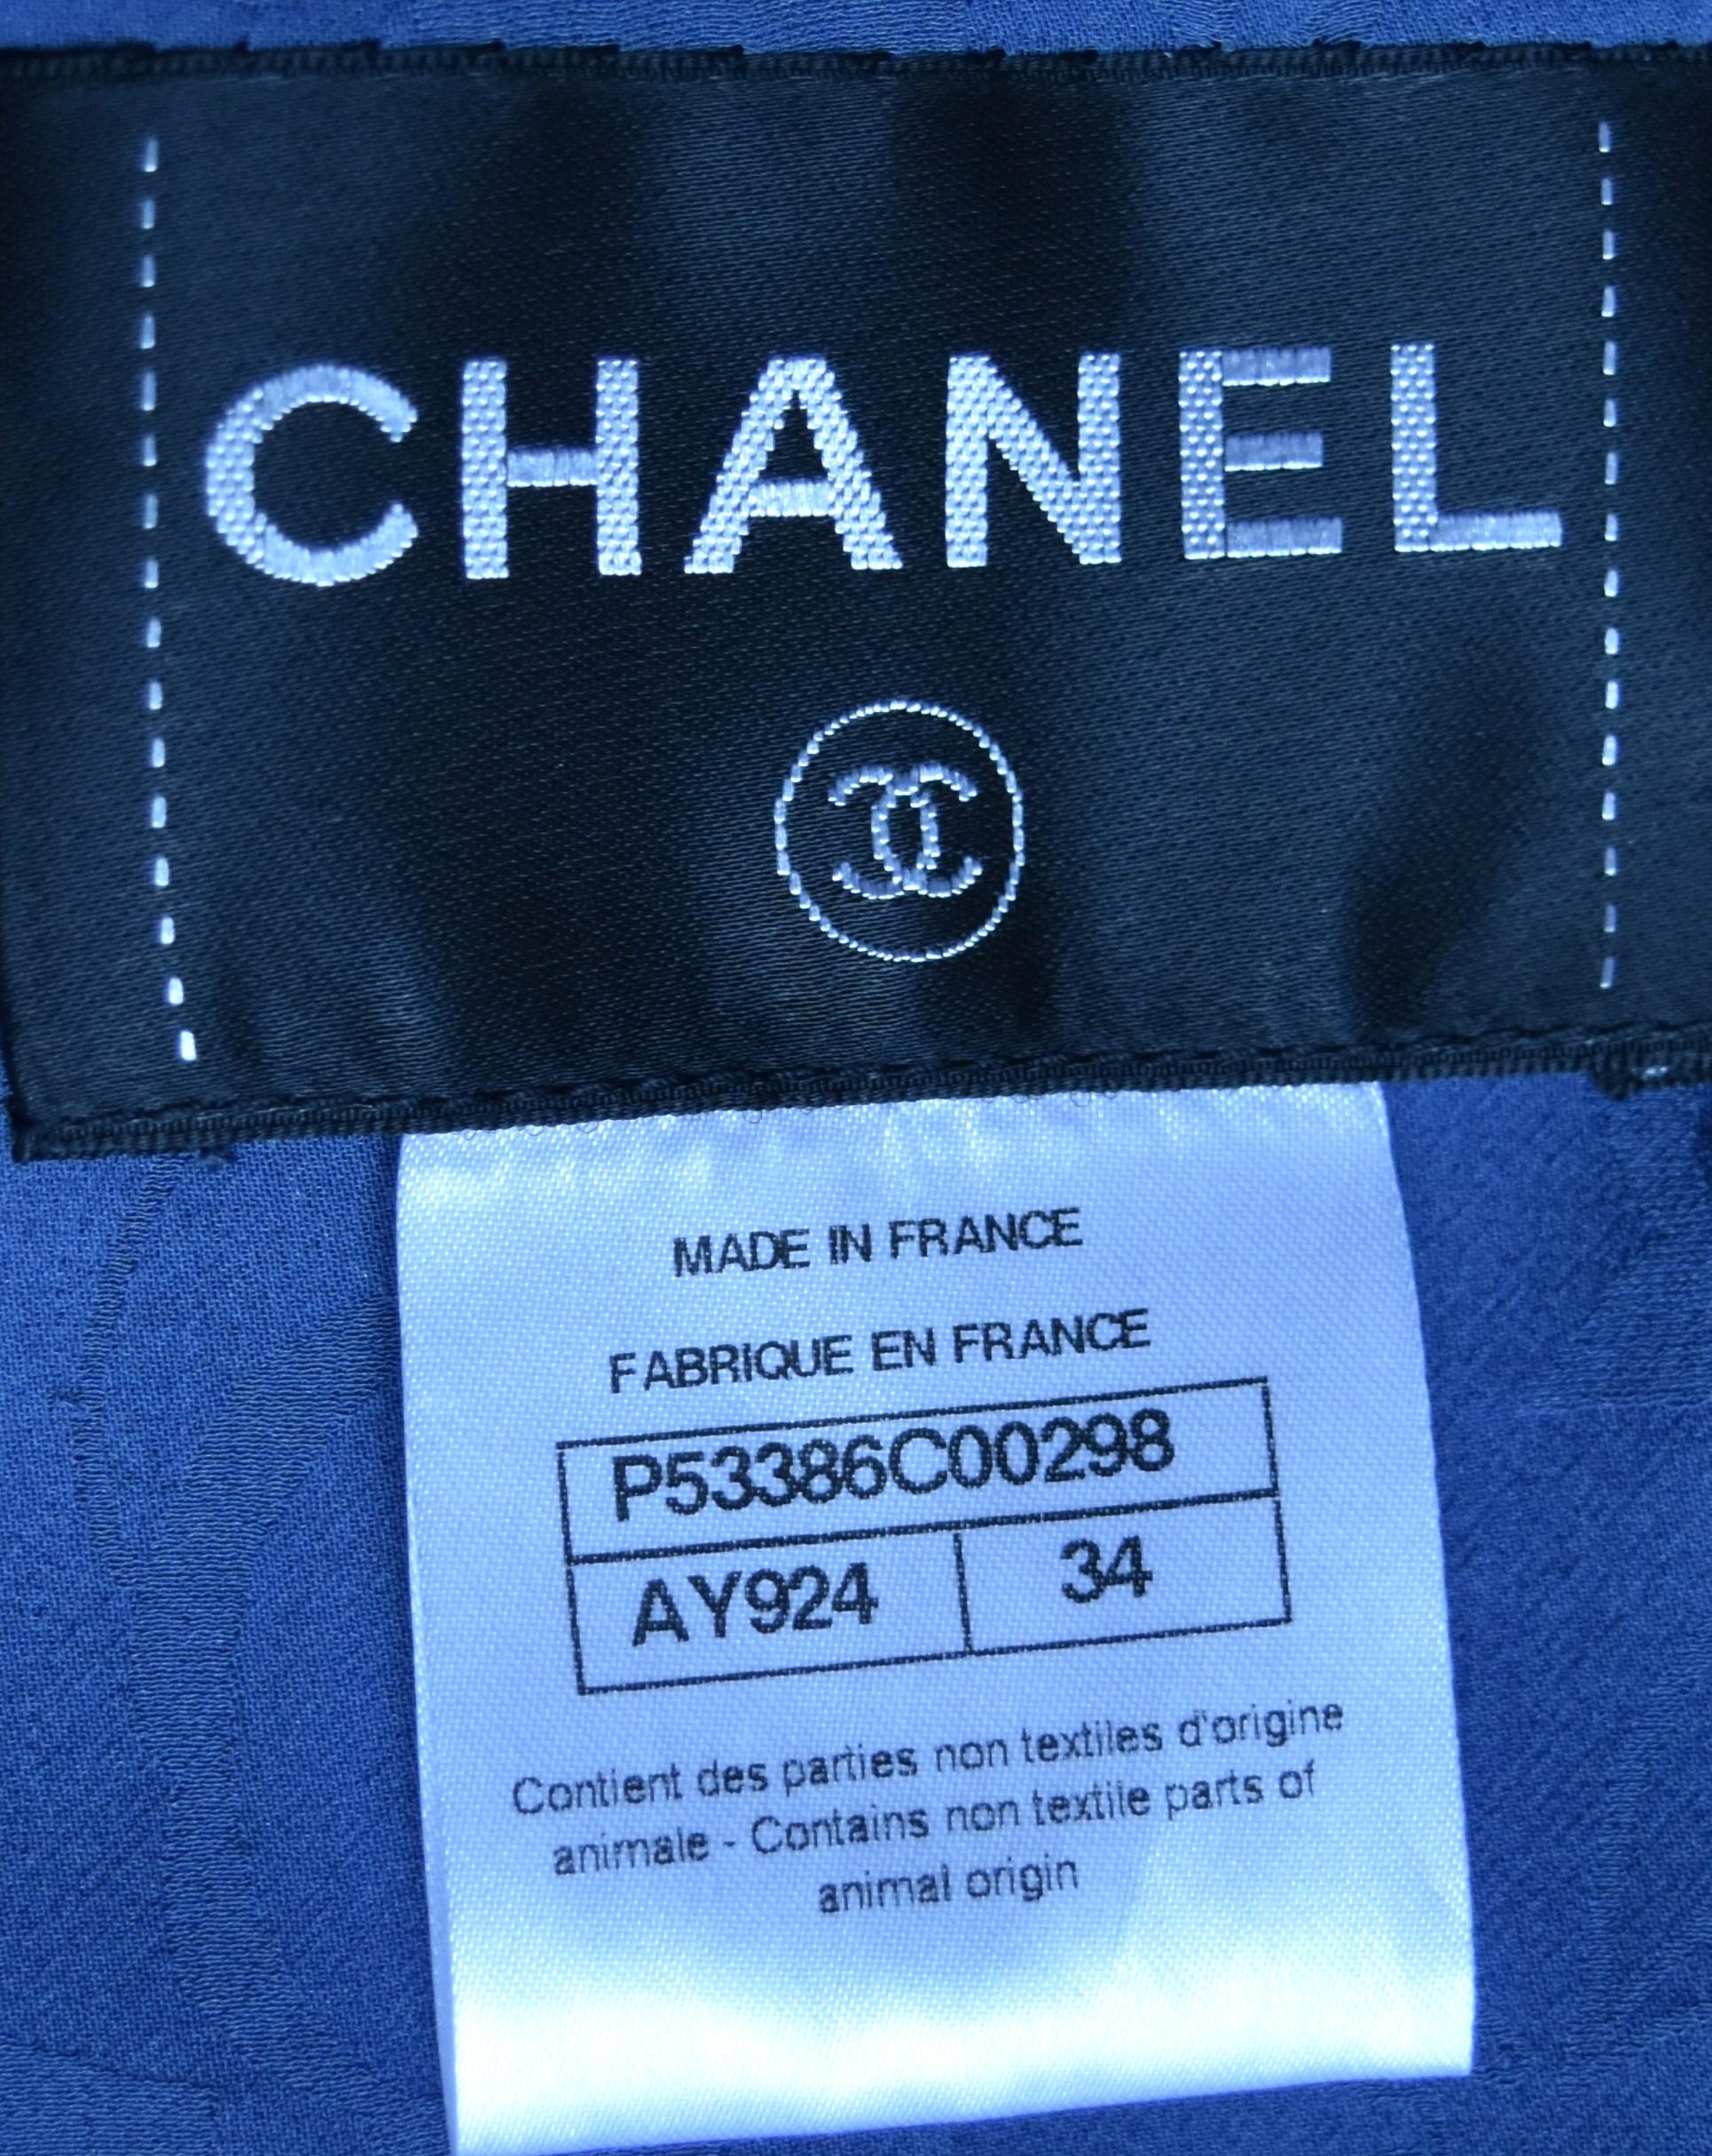 Chanel 2016 tweed embellished jacket fashioned with full length zip front closure. It is new without tag.